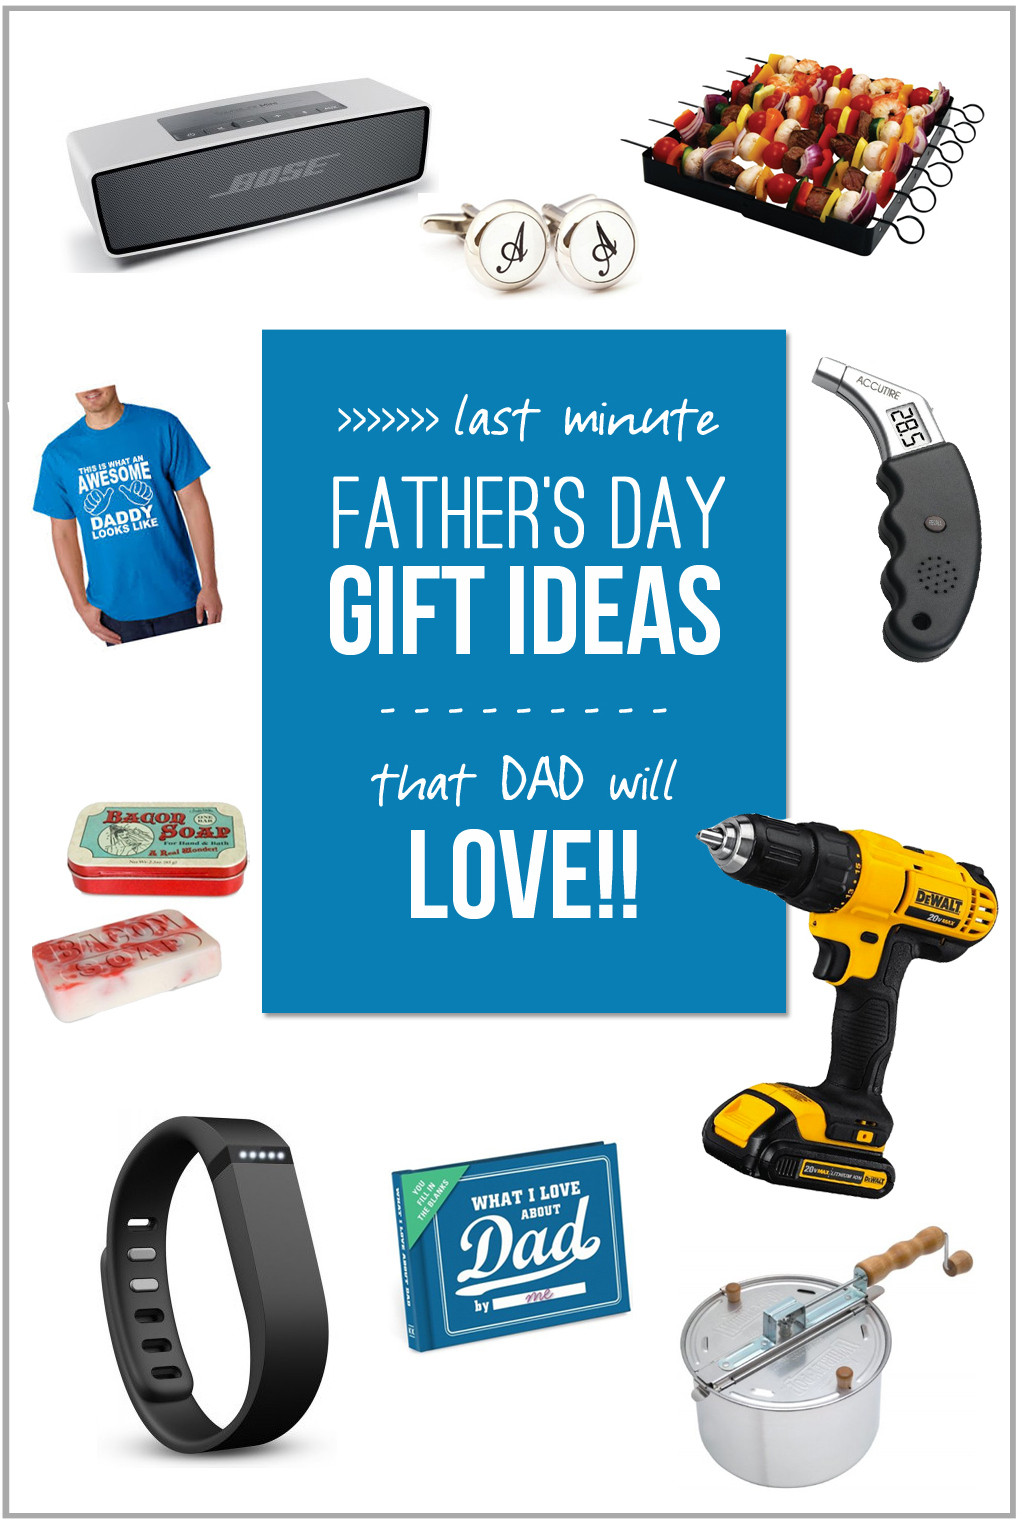 Walmart Fathers Day Gift Ideas
 Last Minute Father s Day Gift Ideas at DAD will LOVE